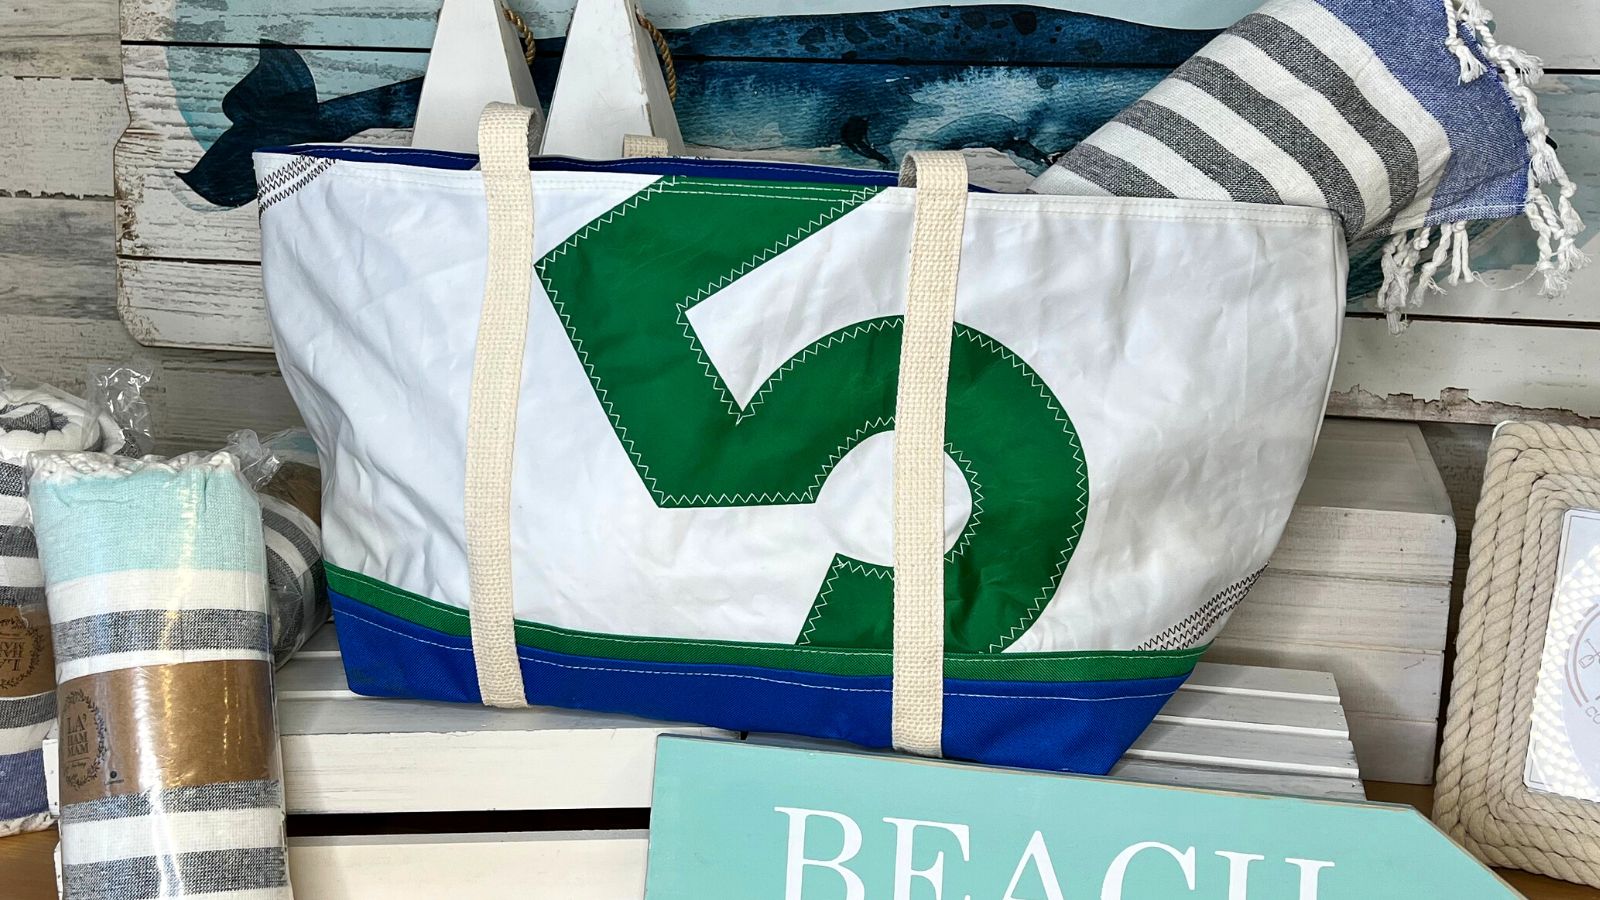 Recycled Sail Bag Buying Guide for 2019